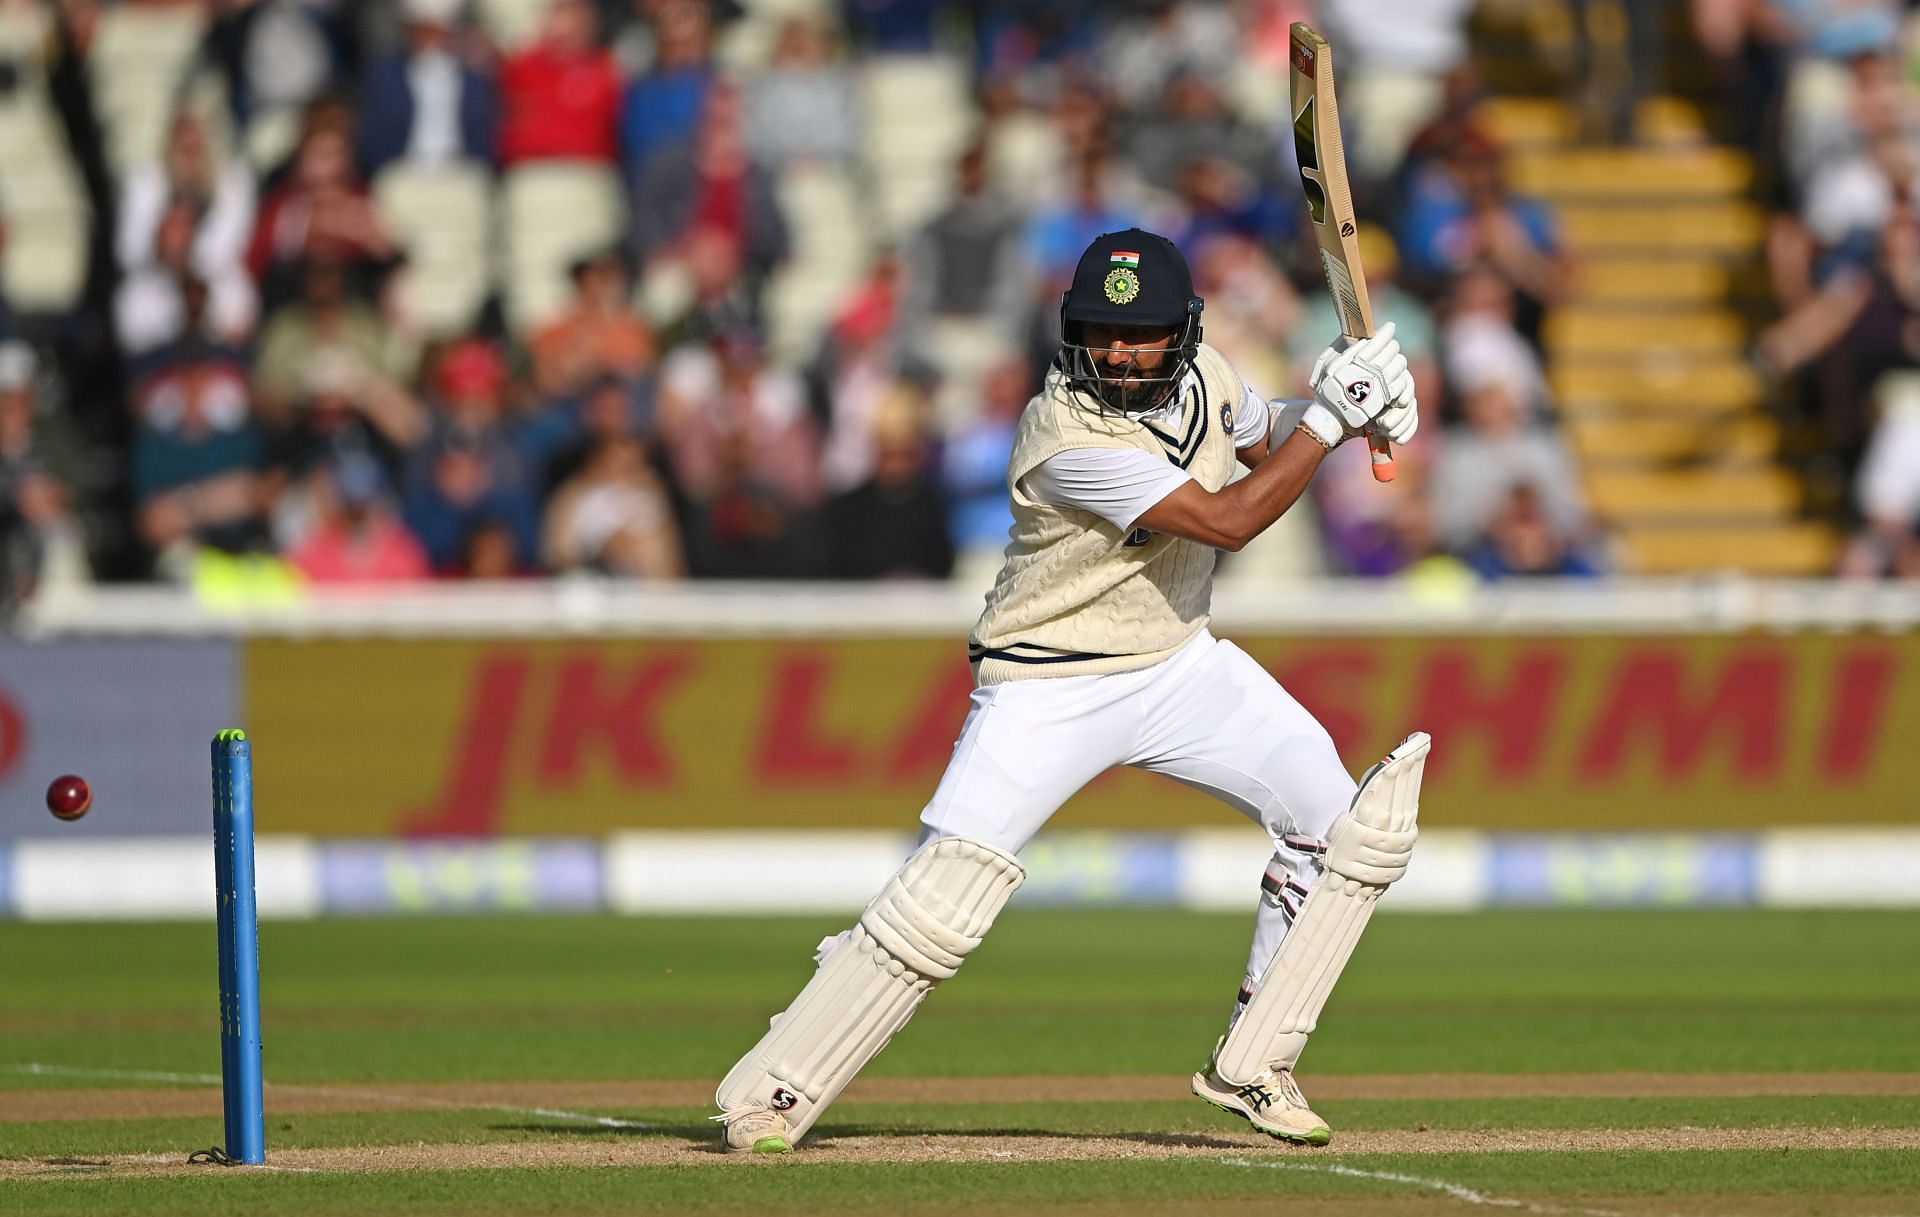 Cheteshwar Pujara primarily relies on grounded shots to score his runs.